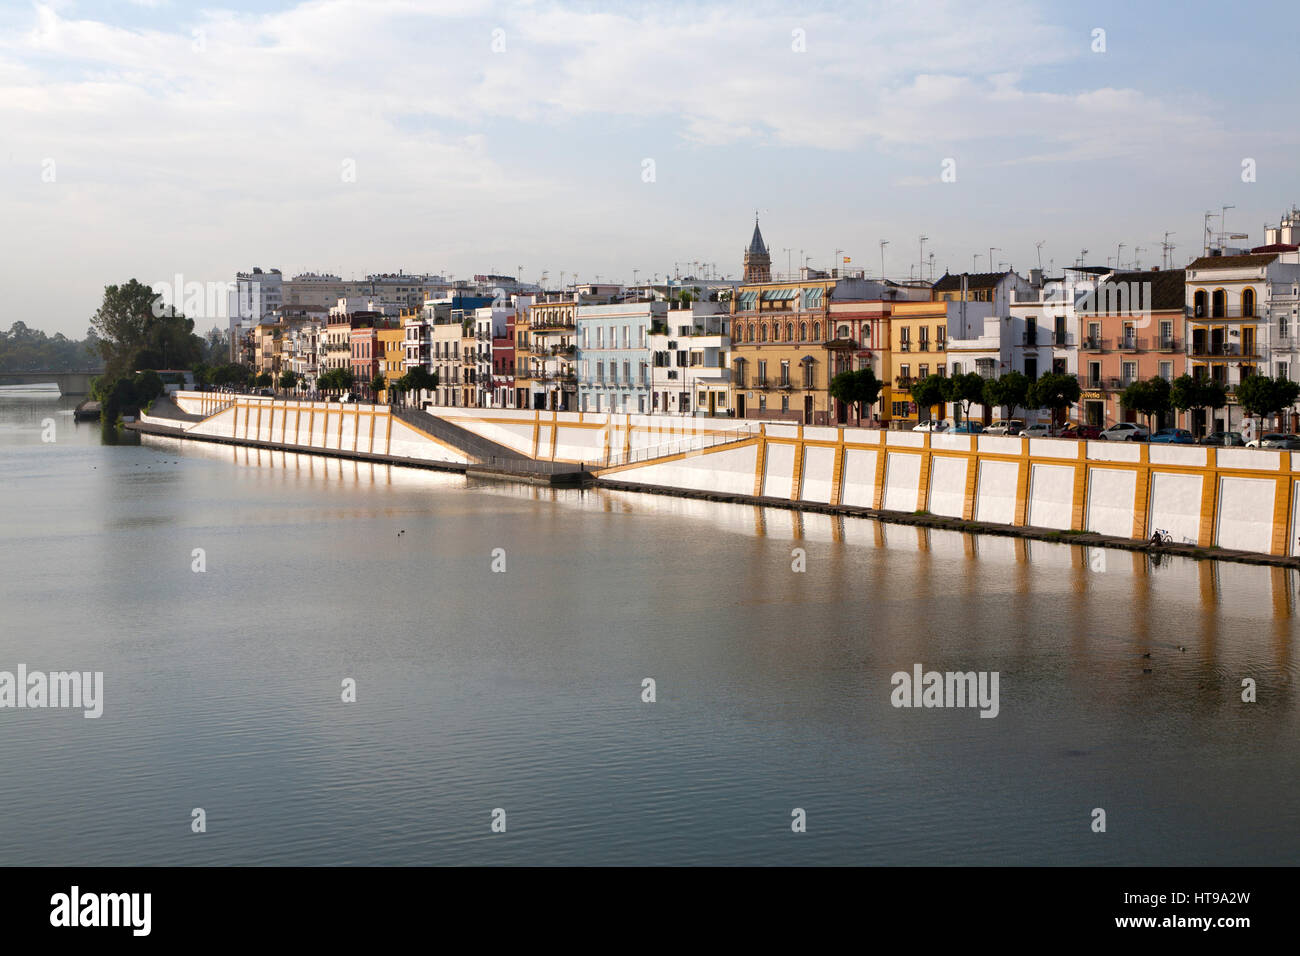 Historic houses on Calle Betis in the Triana district on the banks of the Guadalquivir river, Seville, Spain Stock Photo